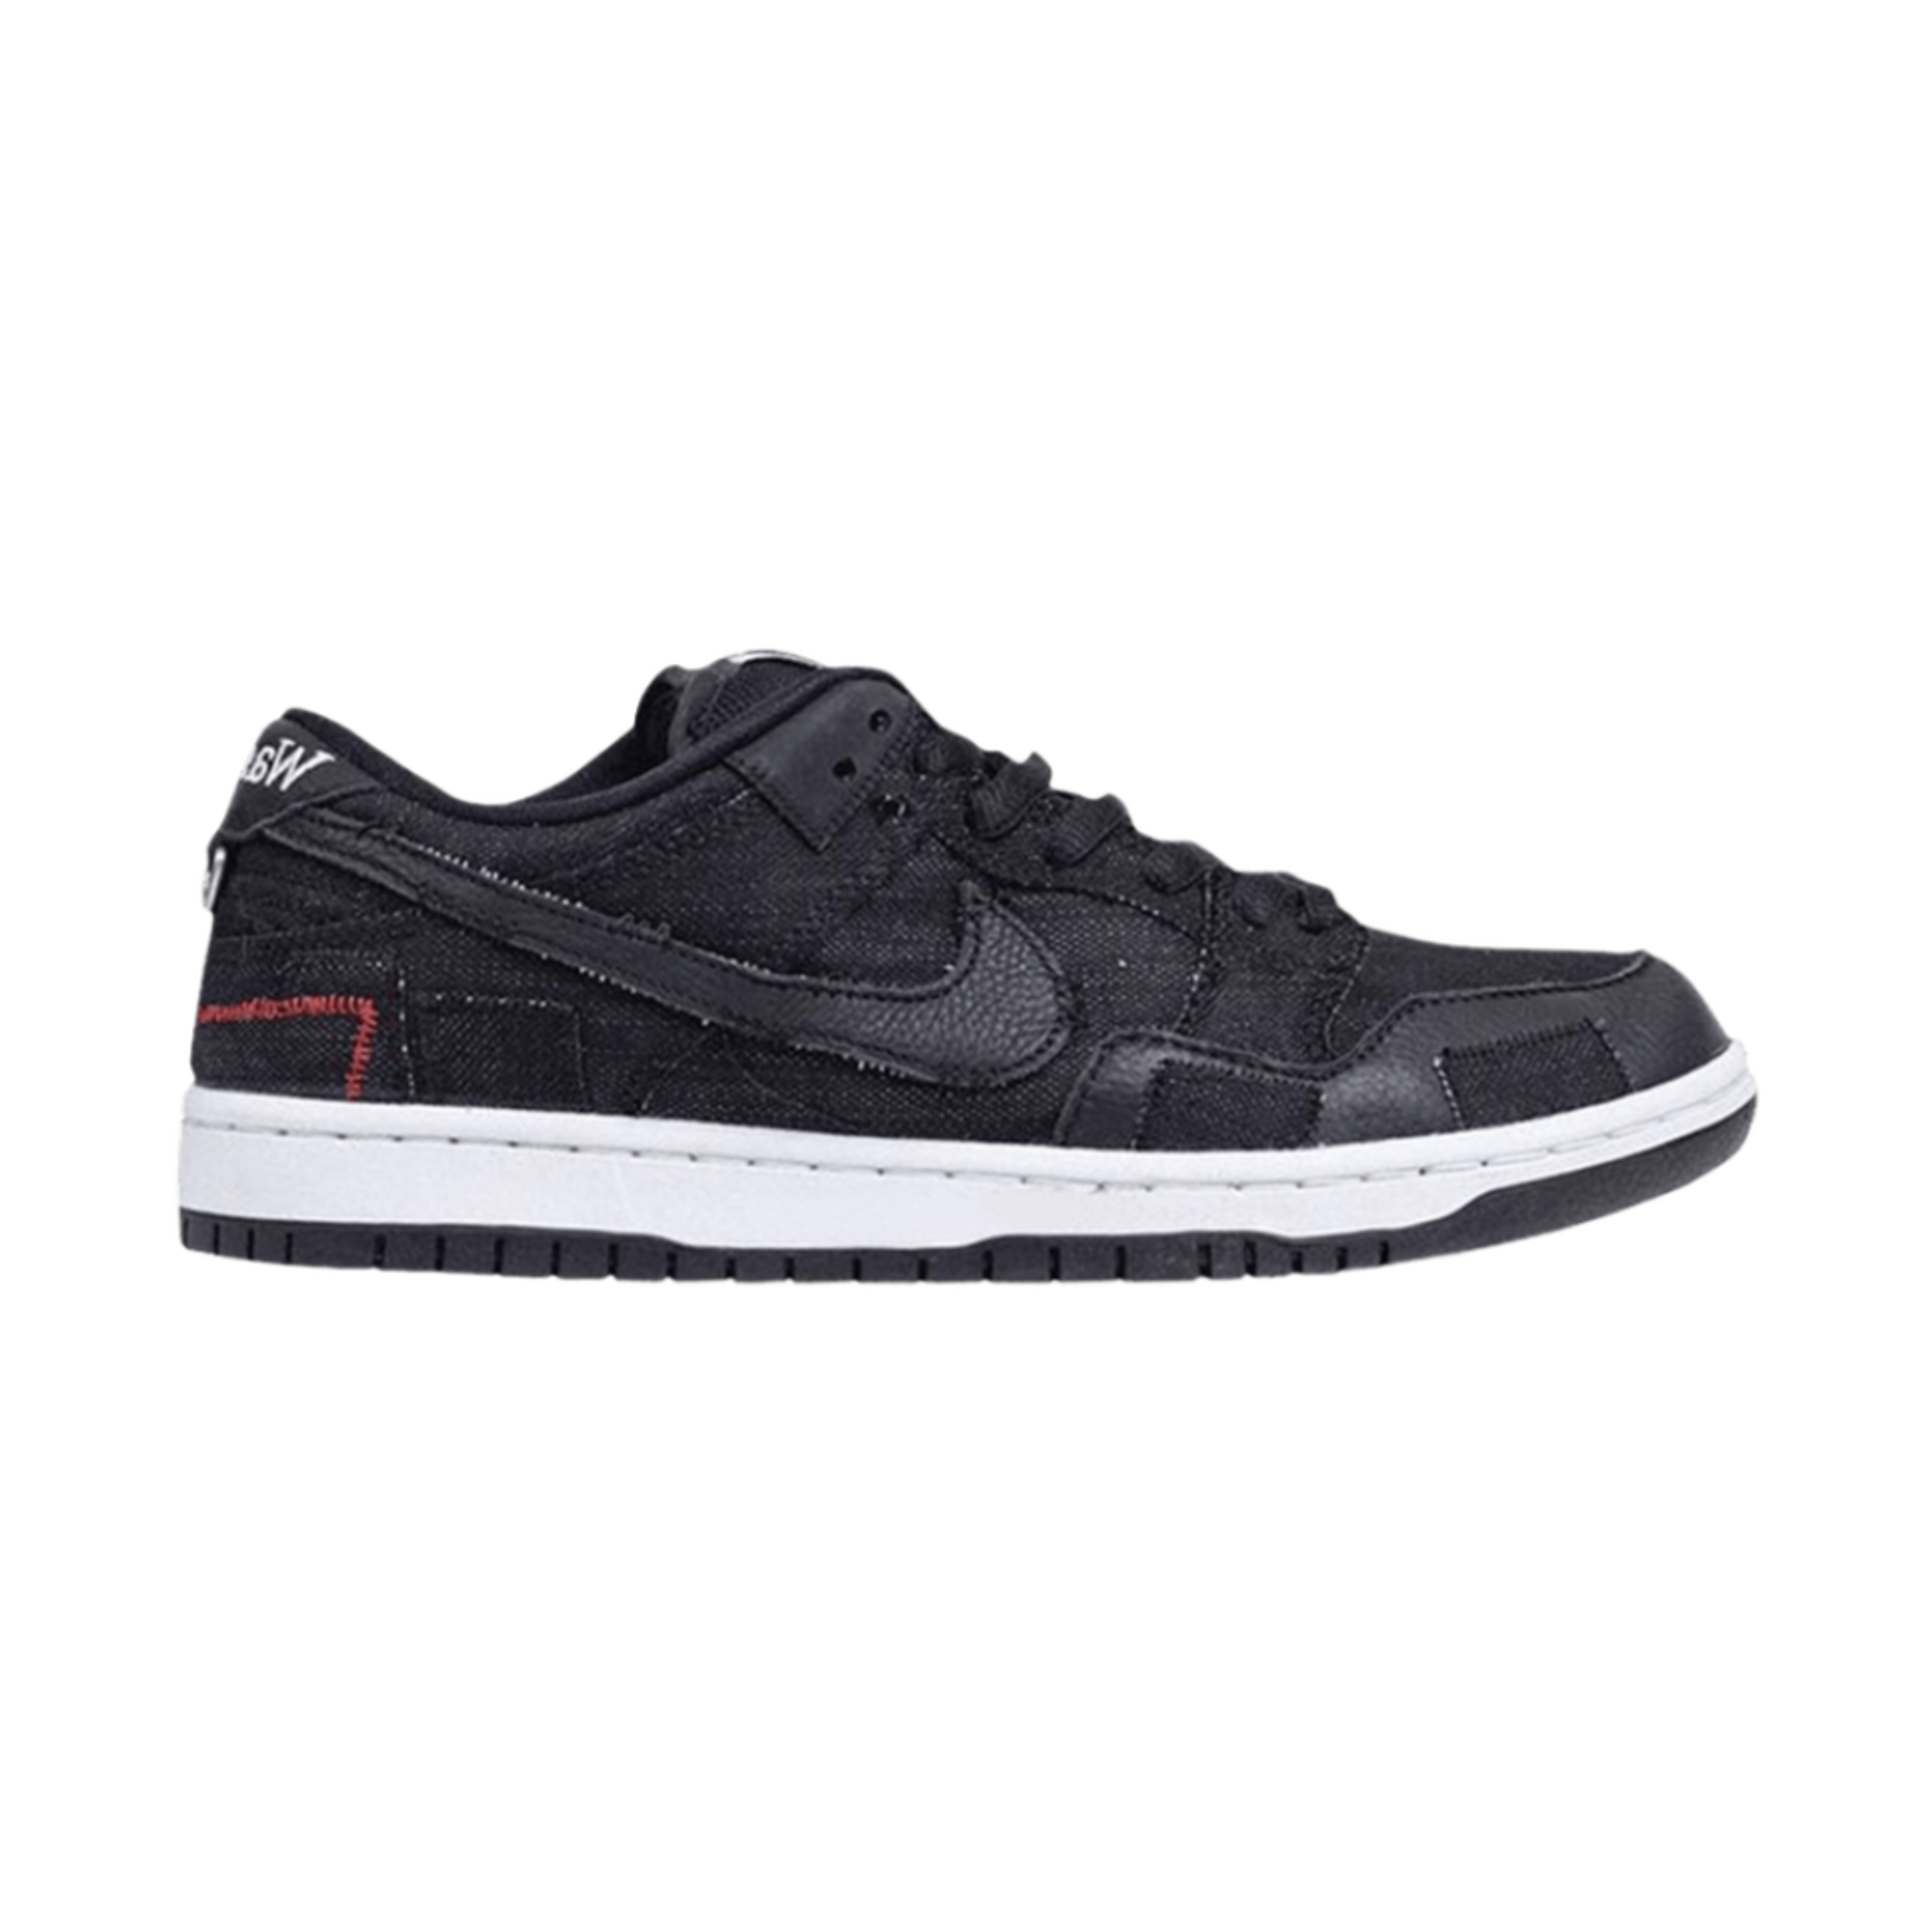 Nike Wasted Youth x Dunk Low SB